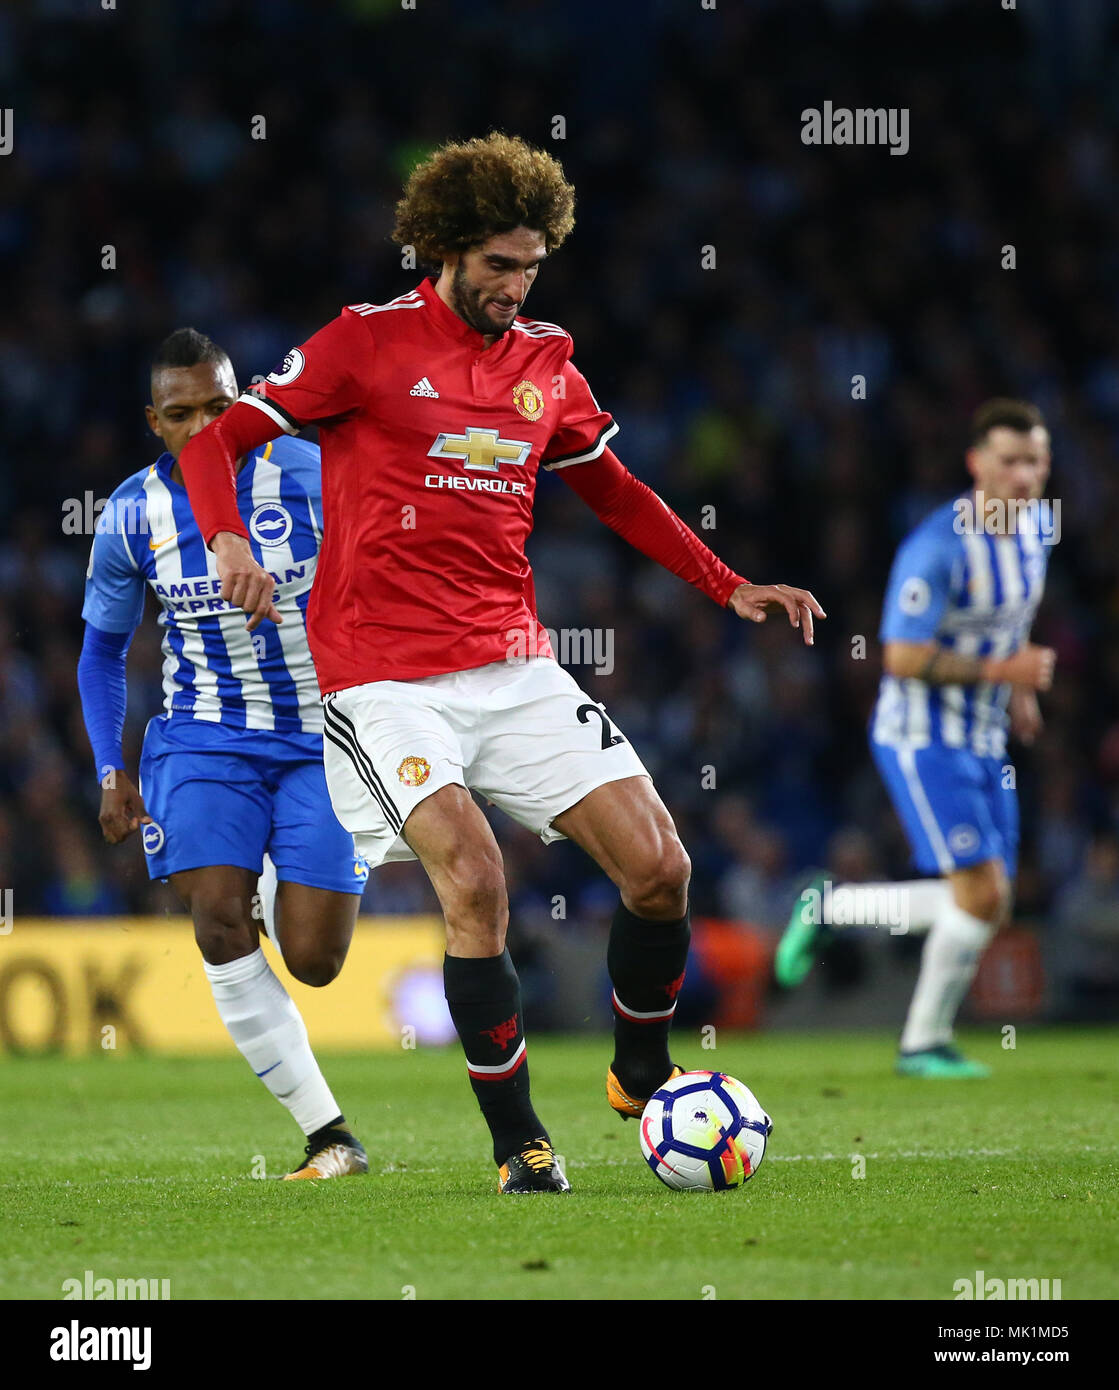 Marouane Fellaini of Manchester United during the Premier League match between Brighton and Hove Albion and Manchester United at the American Express Community Stadium in Brighton and Hove. 04 May 2018 *** EDITORIAL USE ONLY ***  No merchandising. For Football images FA and Premier League restrictions apply inc. no internet/mobile usage without FAPL license - for details contact Football Dataco Stock Photo